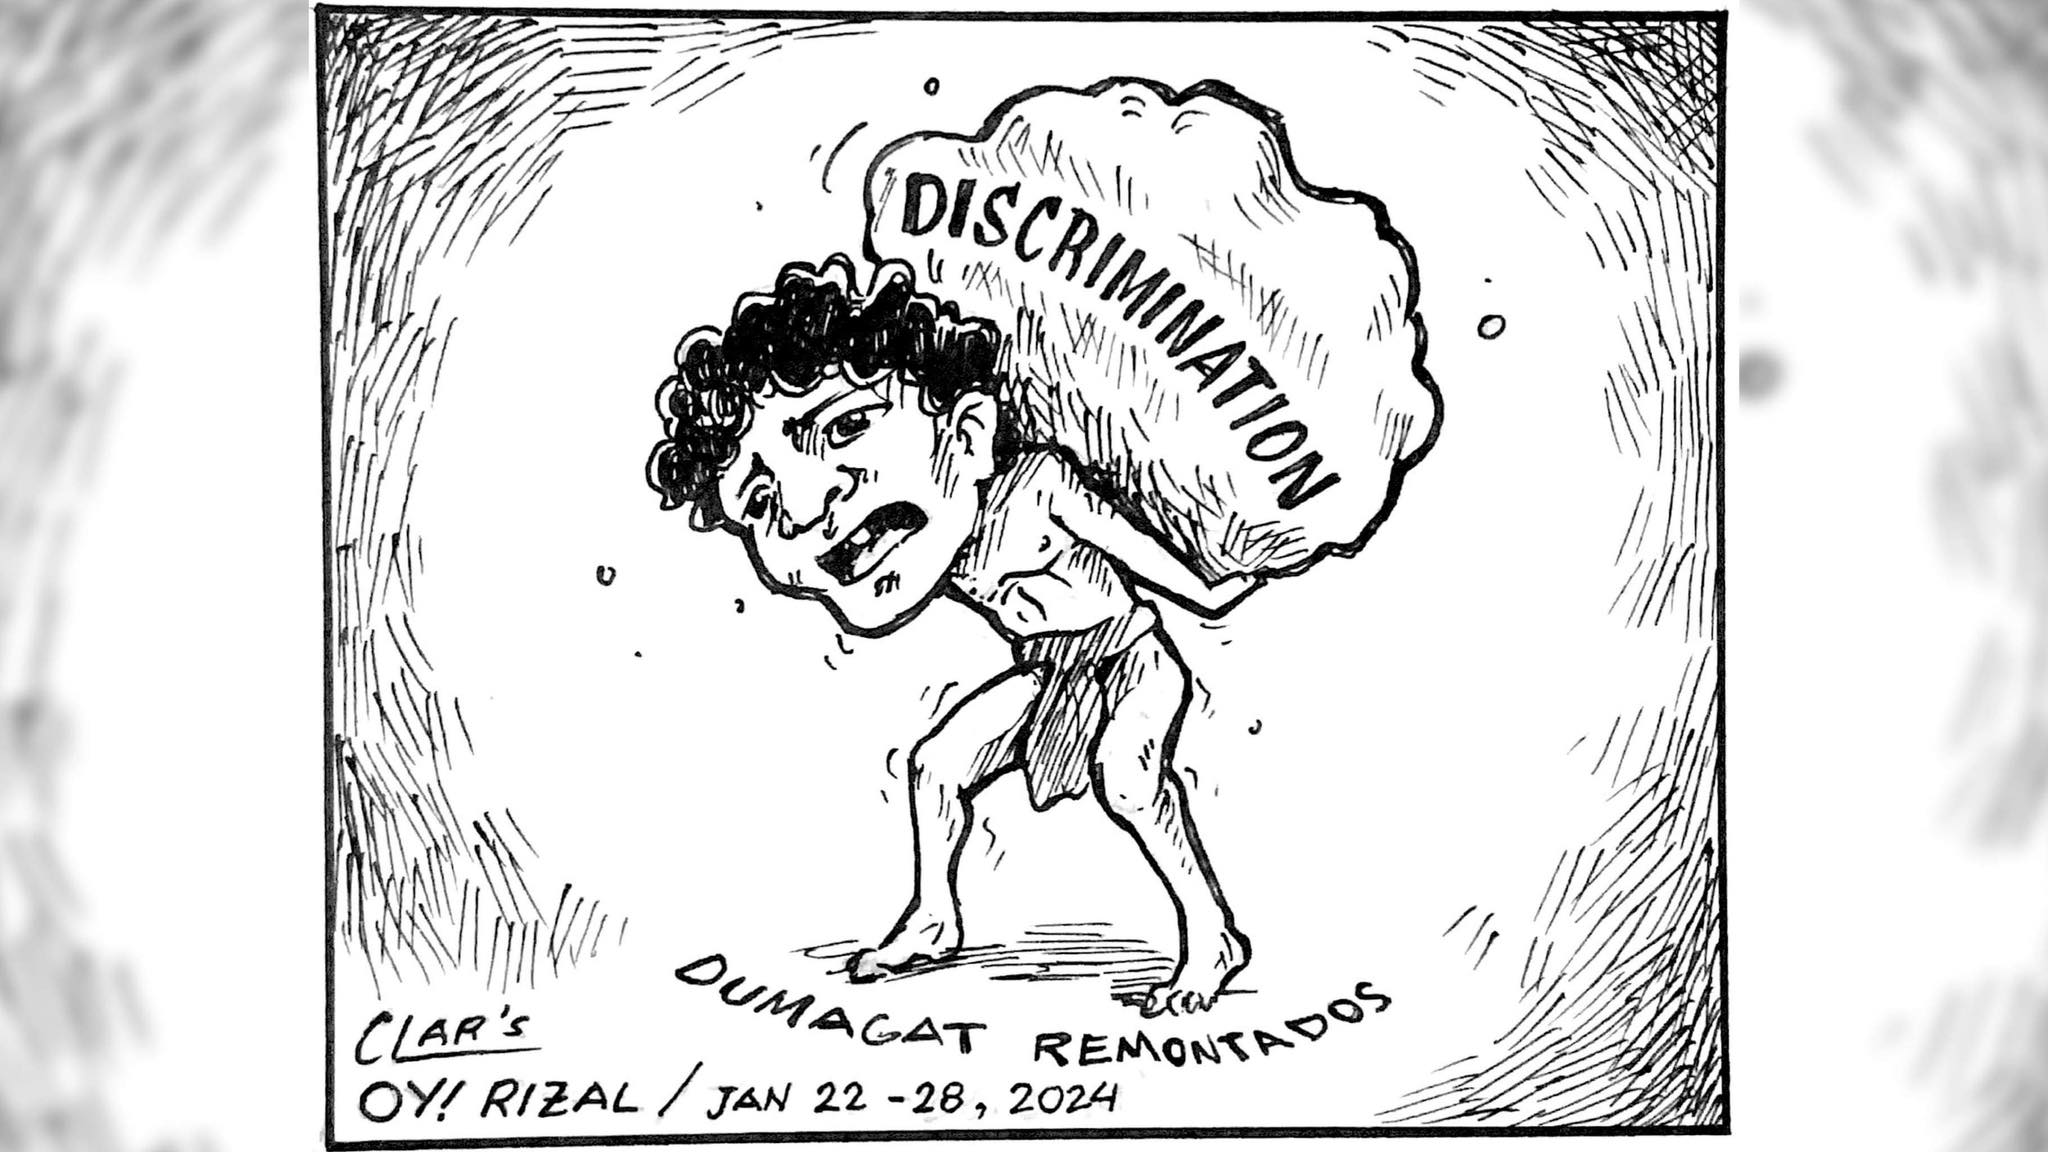 Never-ending cycle of discrimination